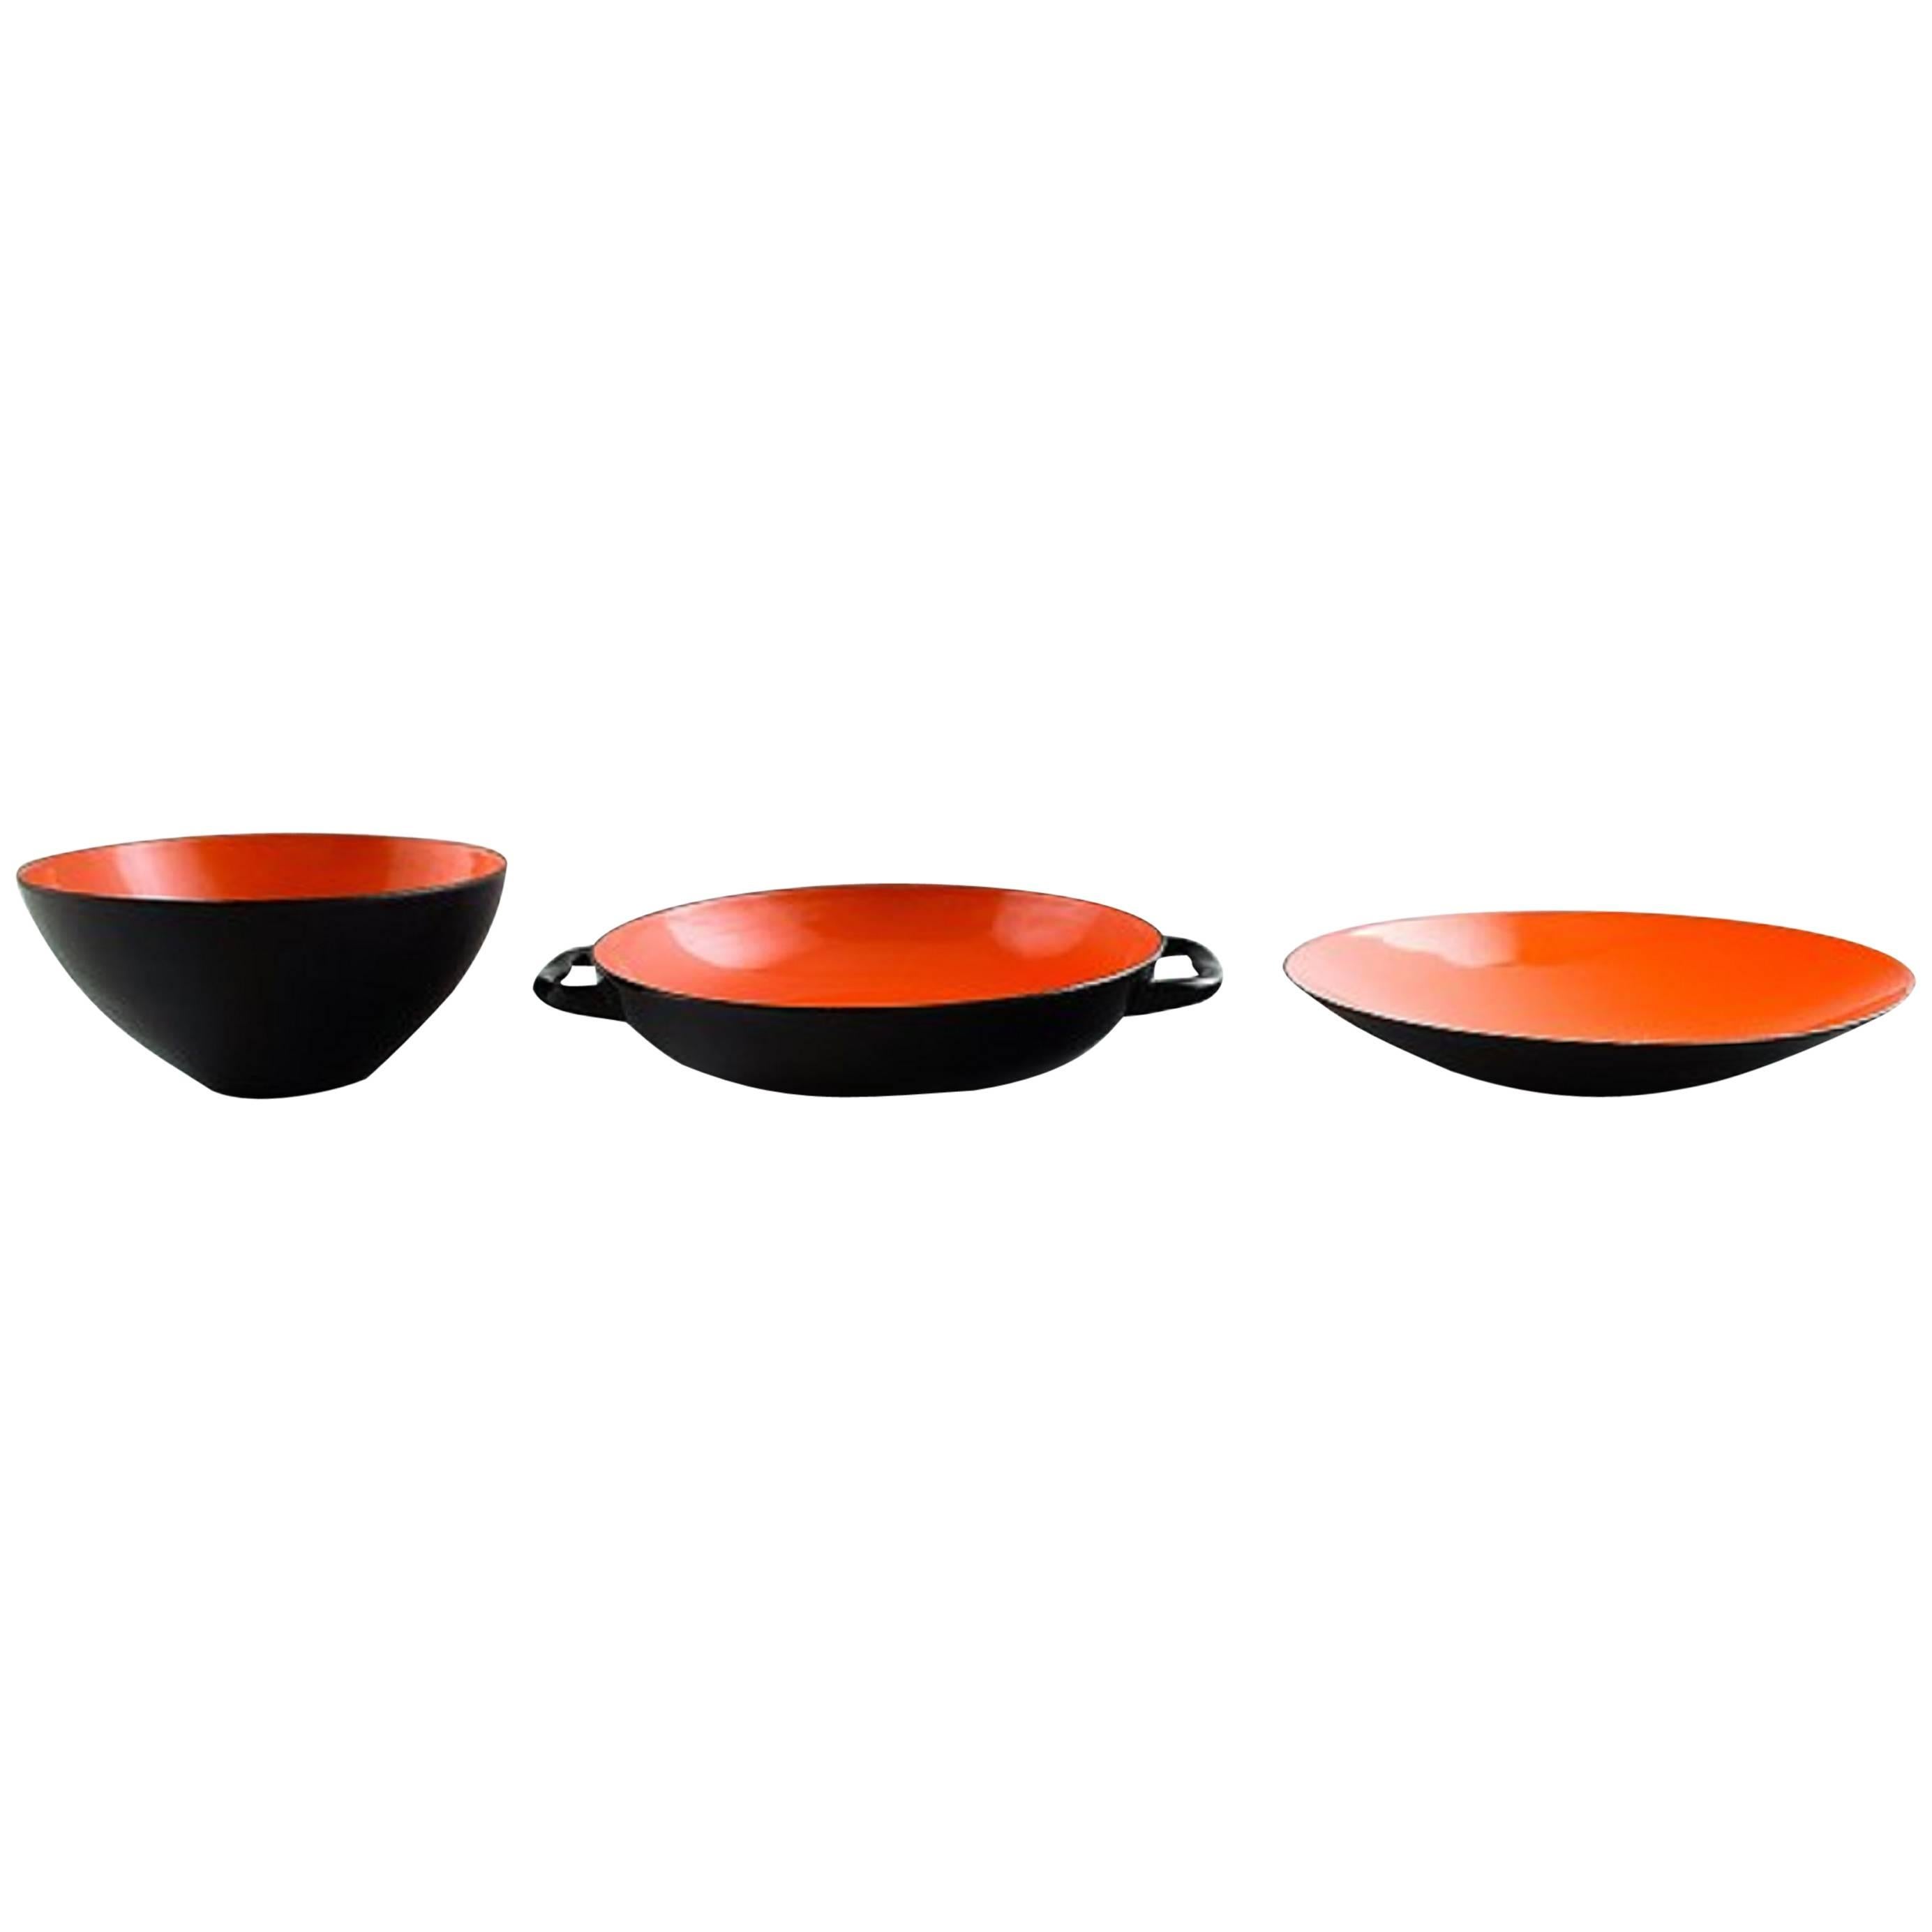 Krenit Bowl and Two Dishes by Herbert Krenchel, 1970s, Danish Design